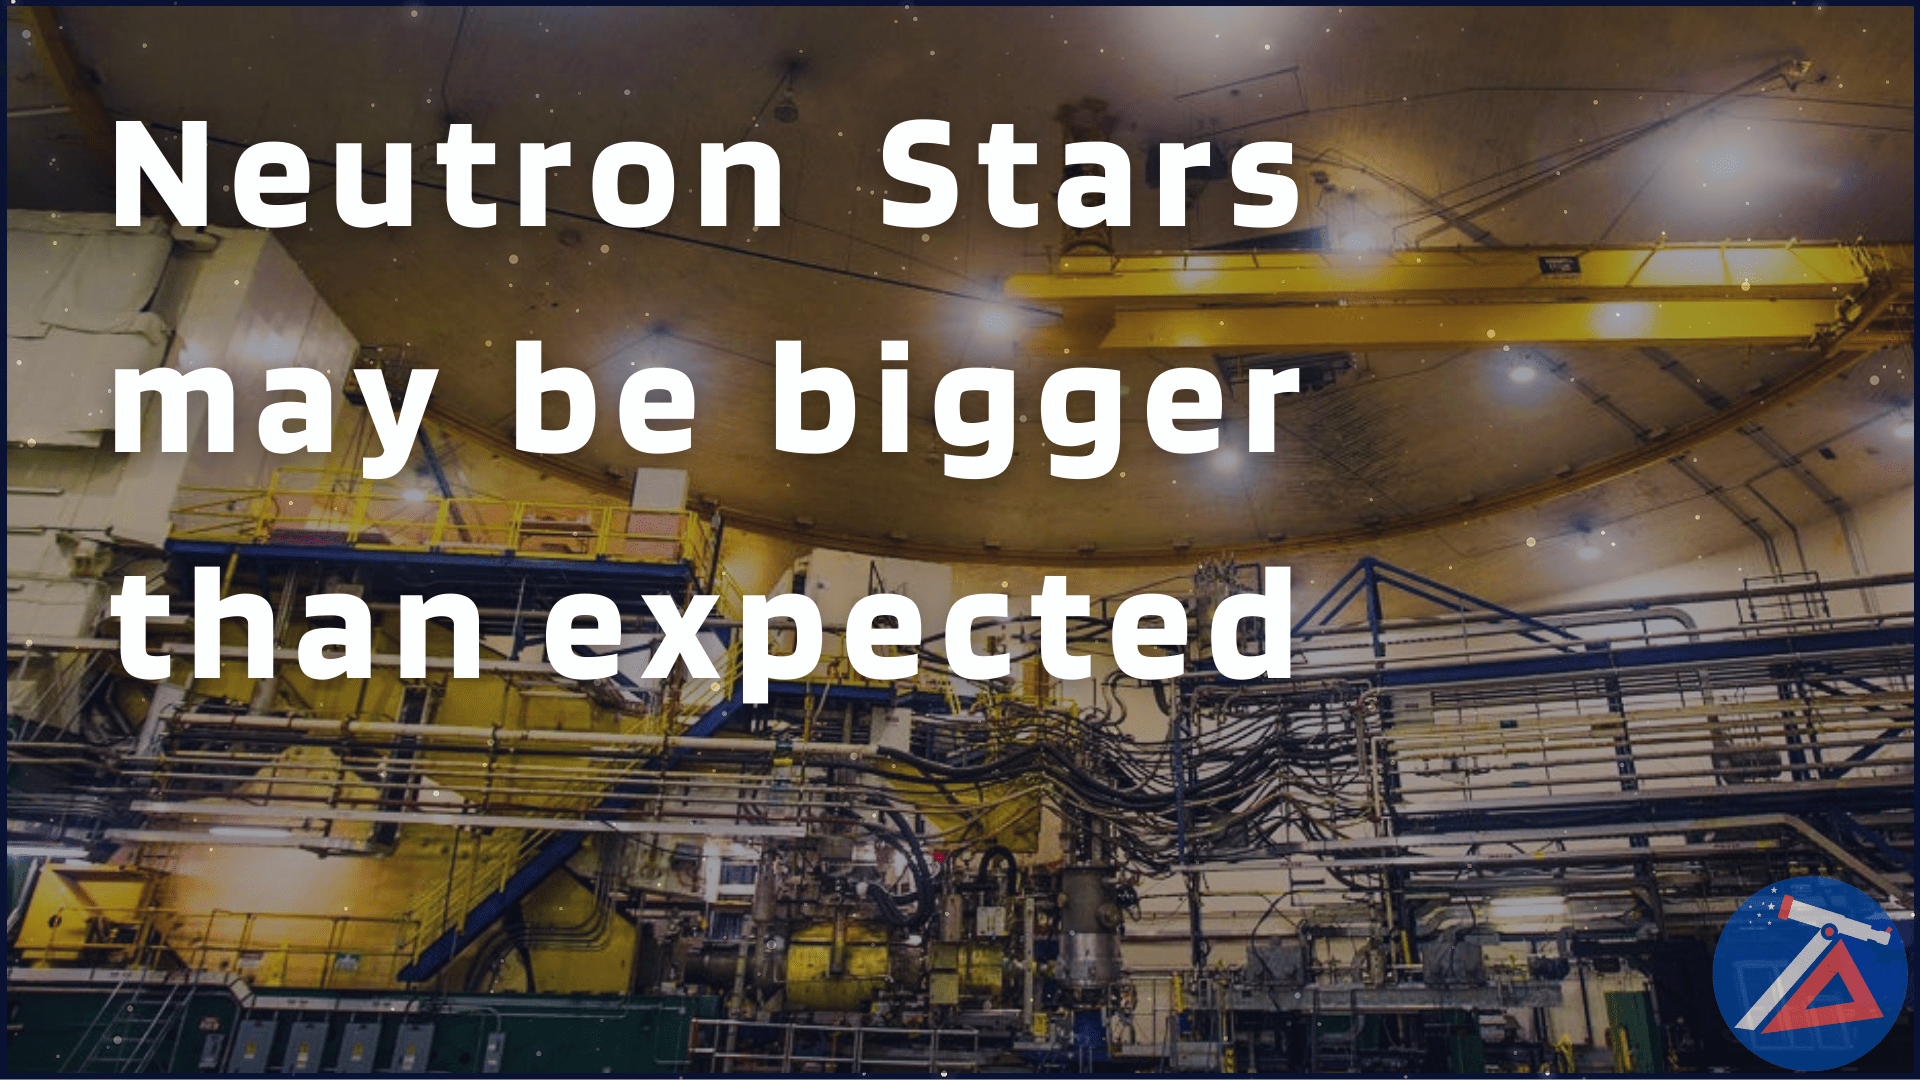 Neutron stars may be bigger than expected, measurement of lead nucleus suggests.